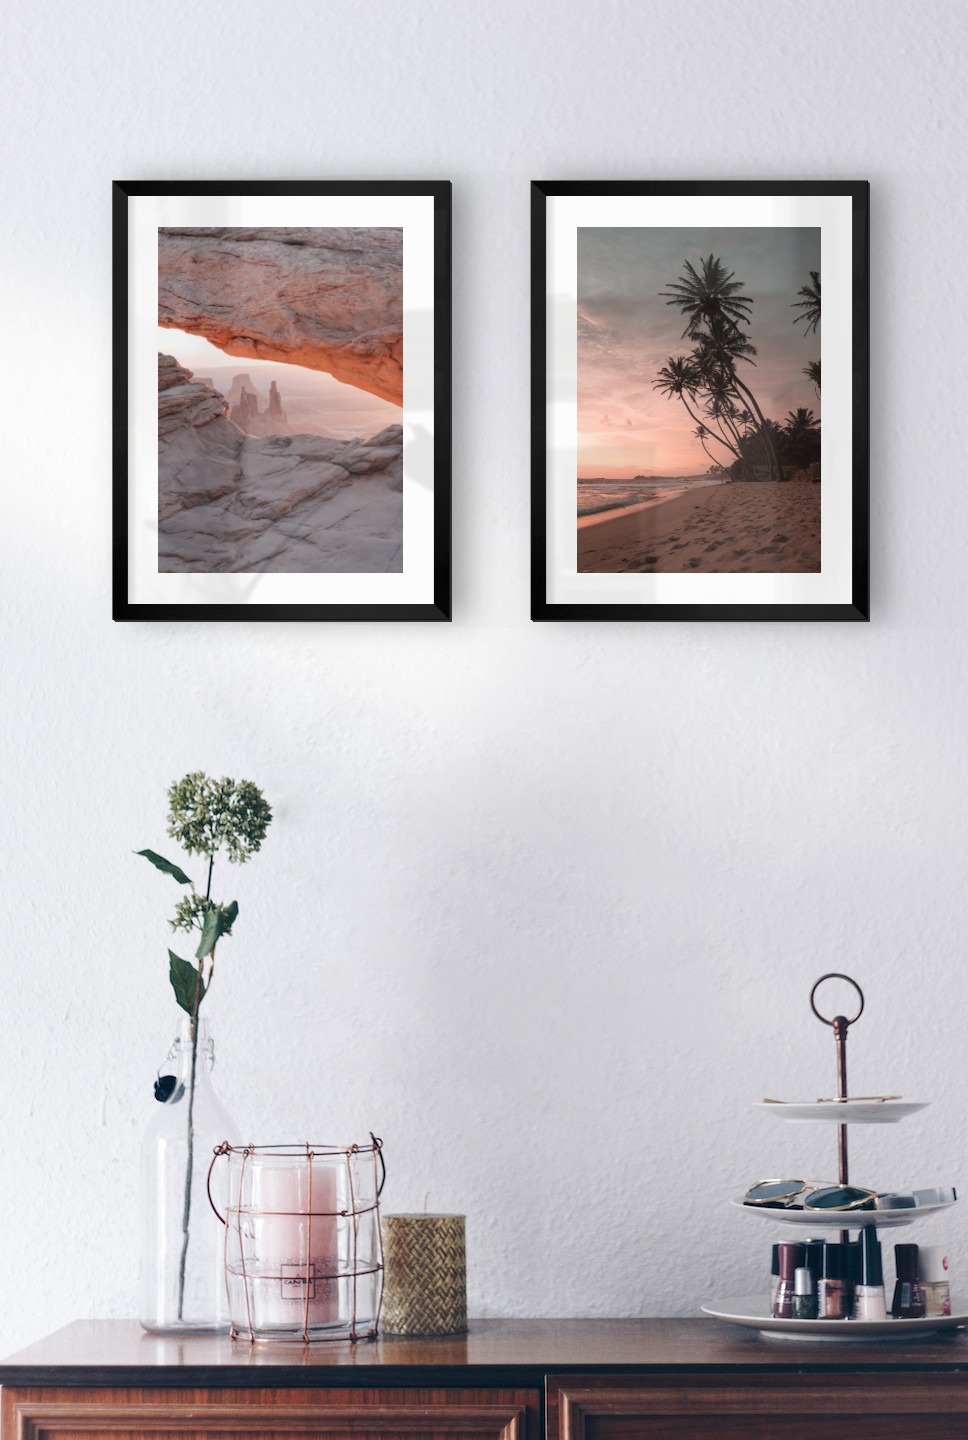 Gallery wall with picture frames in black in sizes 30x40 with prints "View between cliffs" and "Beach at sunset"